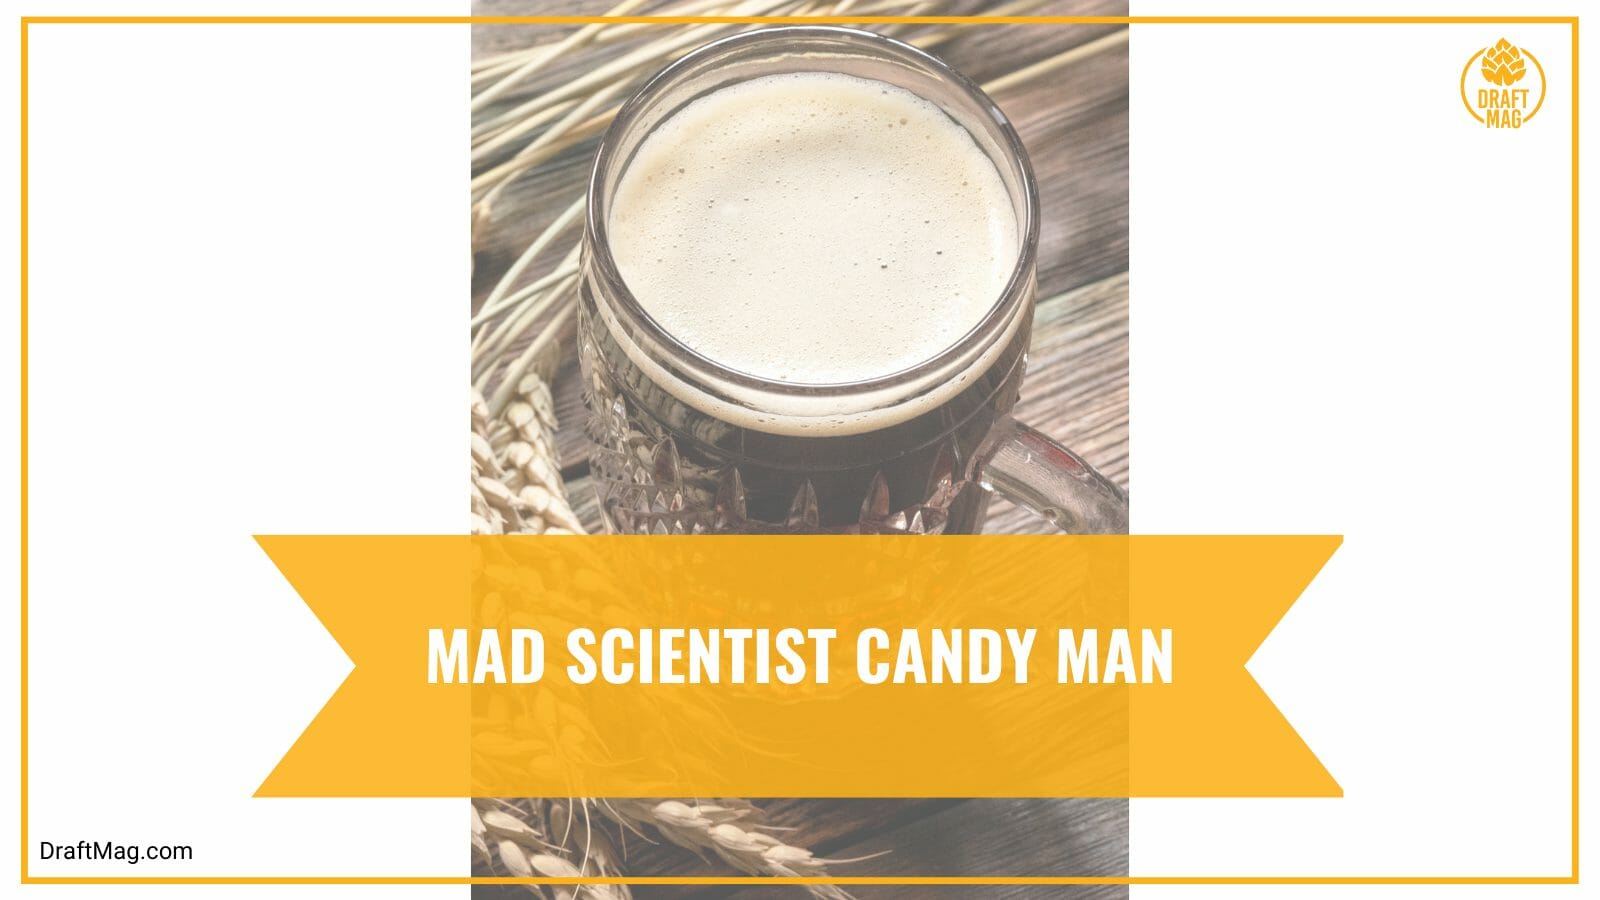 Mad scientist candy man with marshmallow taste